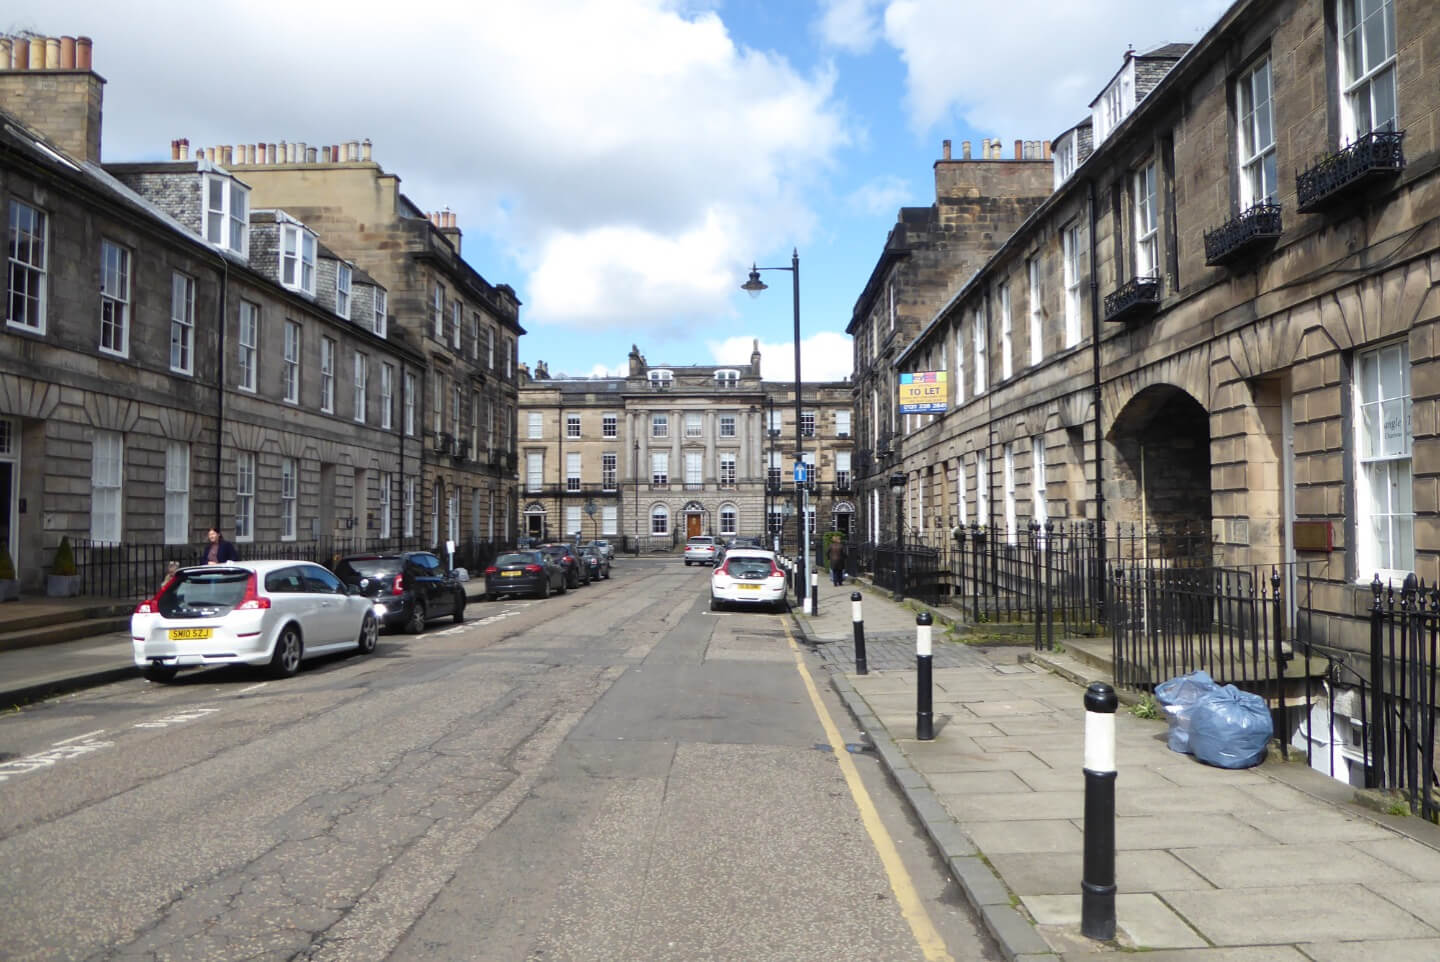 Student Accommodation in West End, Edinburgh - houses on Stafford Street